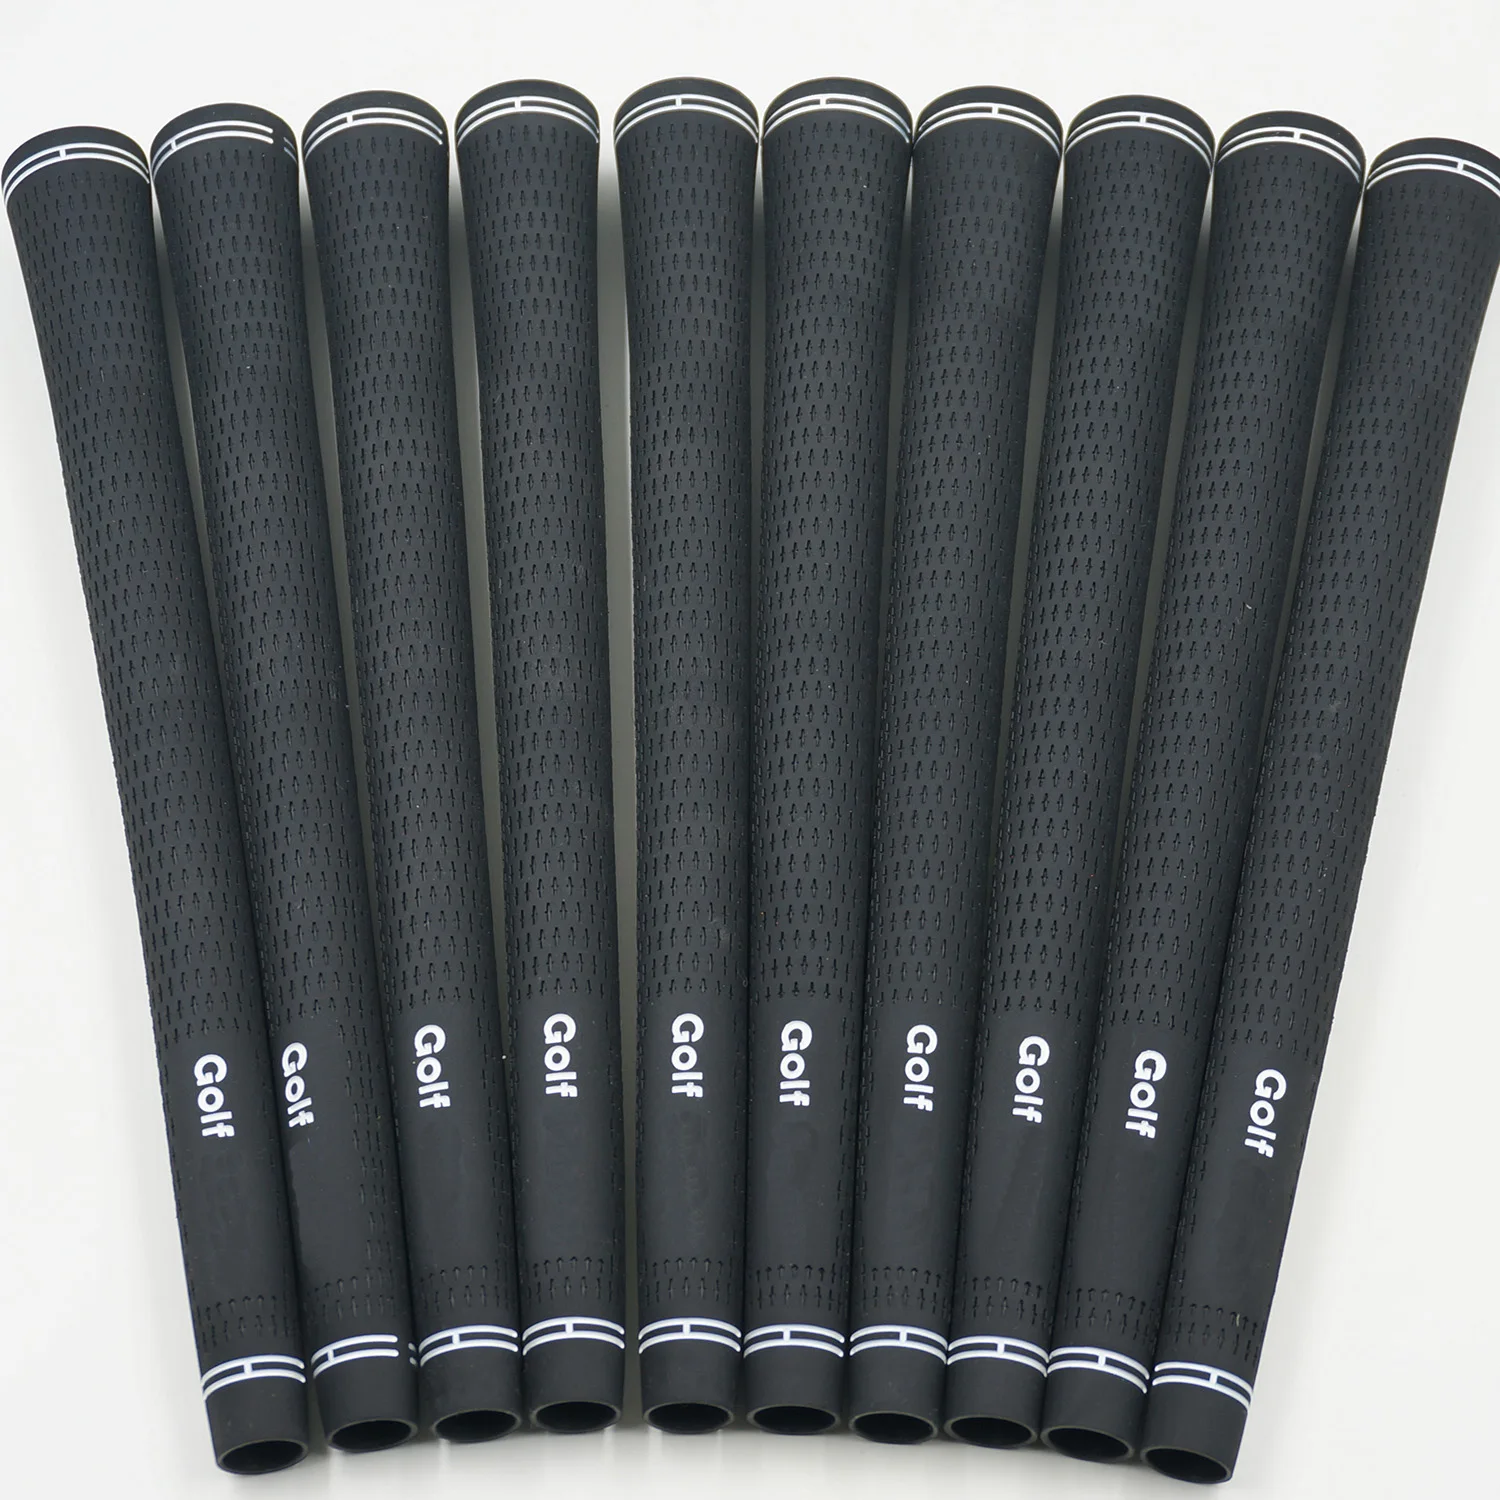 Golf Club TOUR VELVET Grips Standard Midsize Jumbo High-Quality Rubber Grip For Driver Wood And Irons 13Pcs/Lot